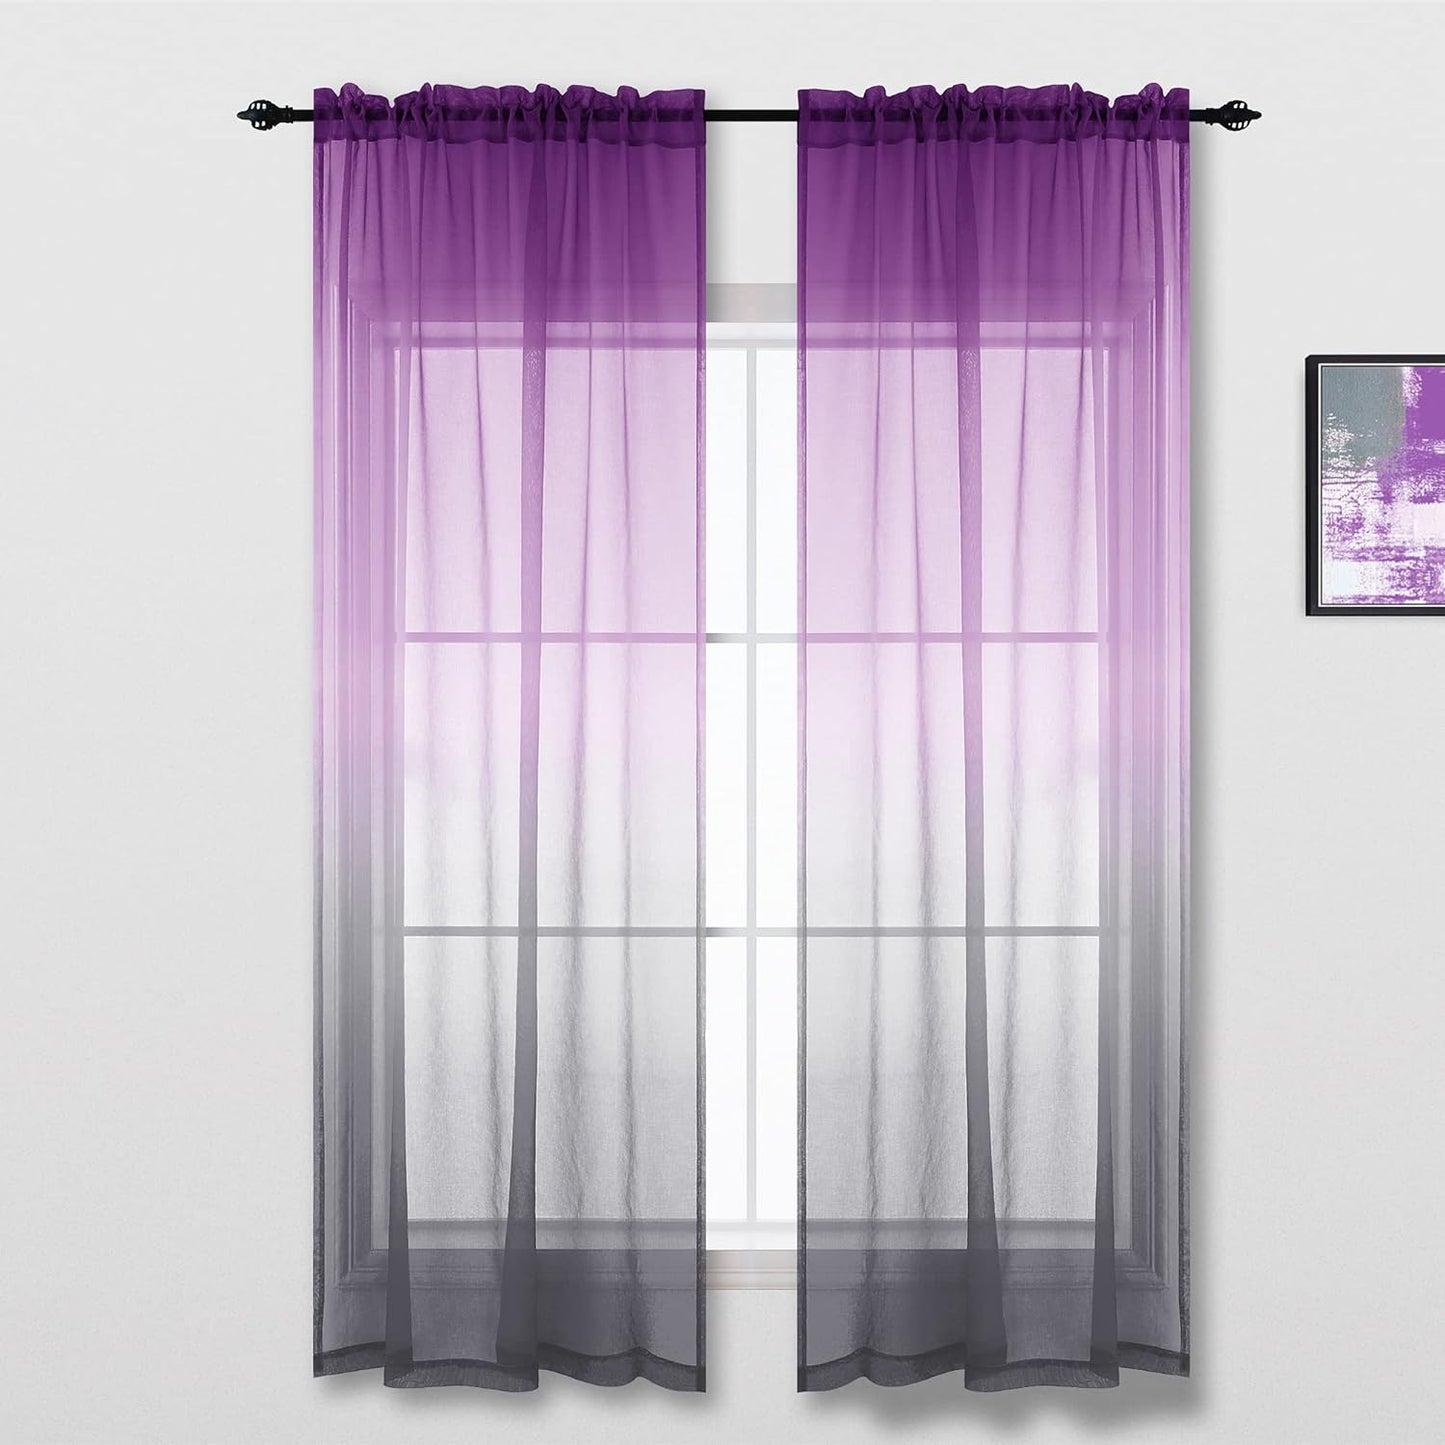 KOUFALL Kids Curtains 2 Panel Set for Bedroom Girls Room Mermaid Decor,Sheer Ombre Baby Curtains for Nursery,Purple and Teal,63 Inch Length  KOUFALL TEXTILE Purple And Grey 52X63 